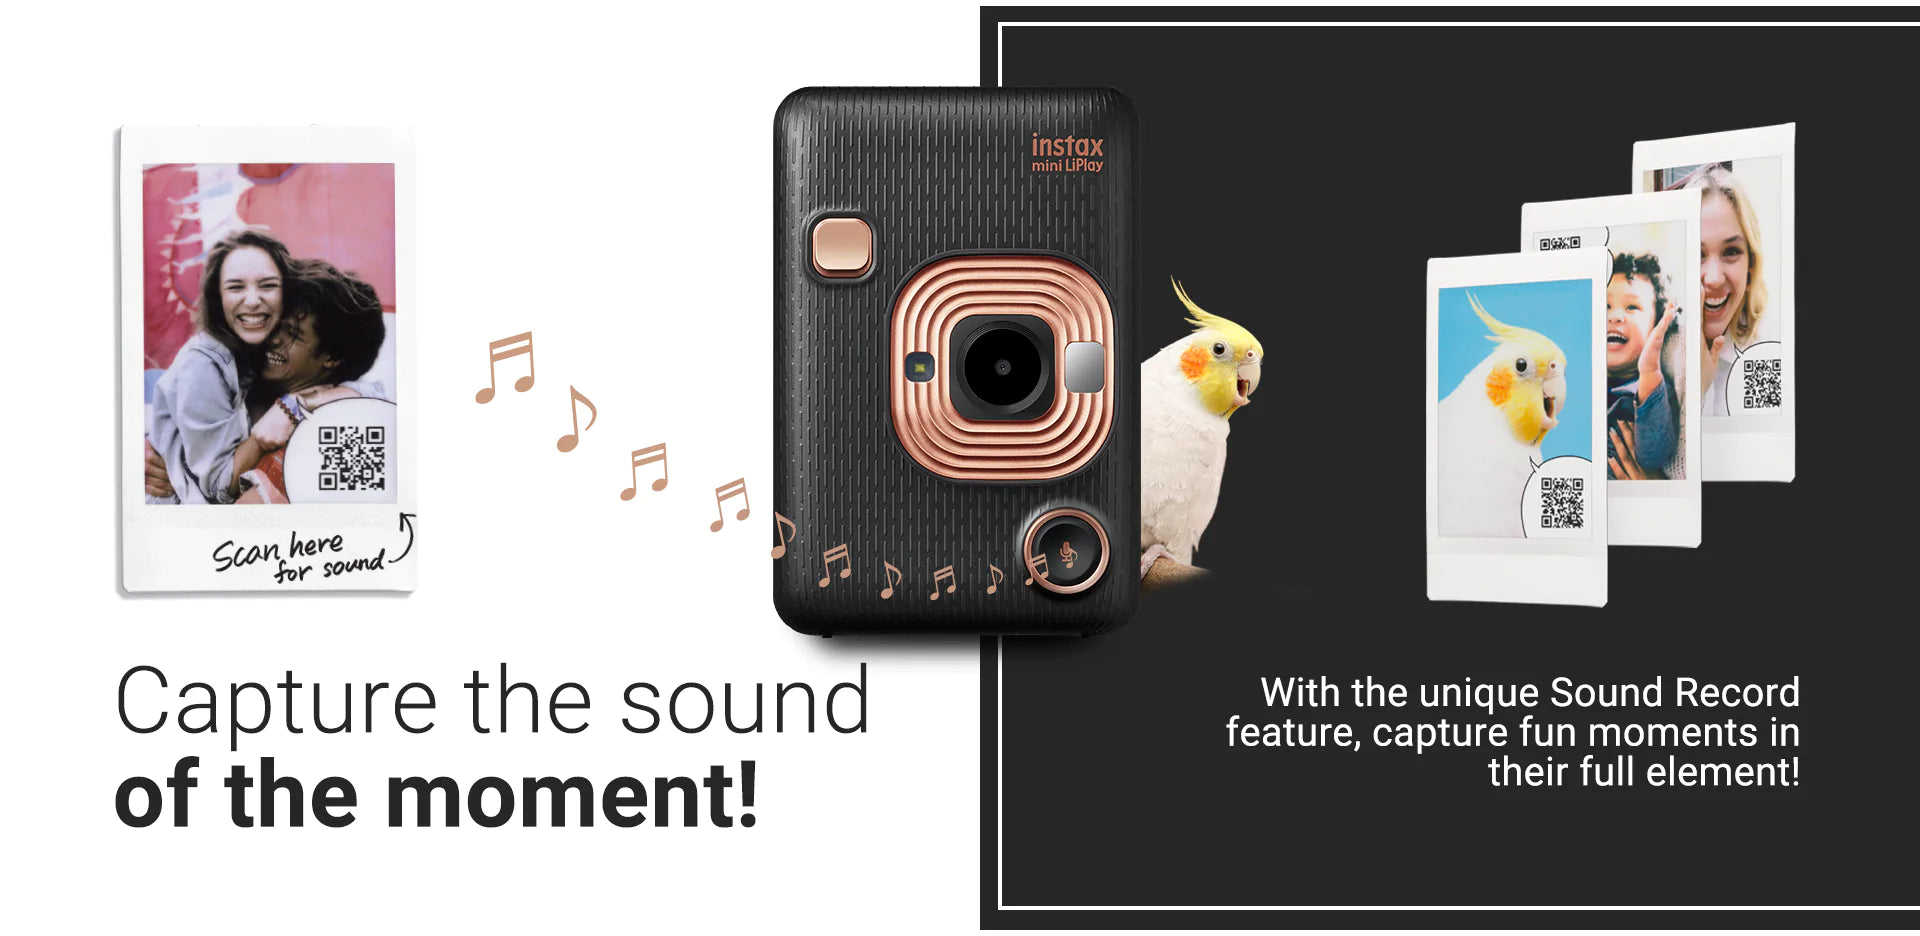 Instax Mini LiPlay - Capture the sound of the moment